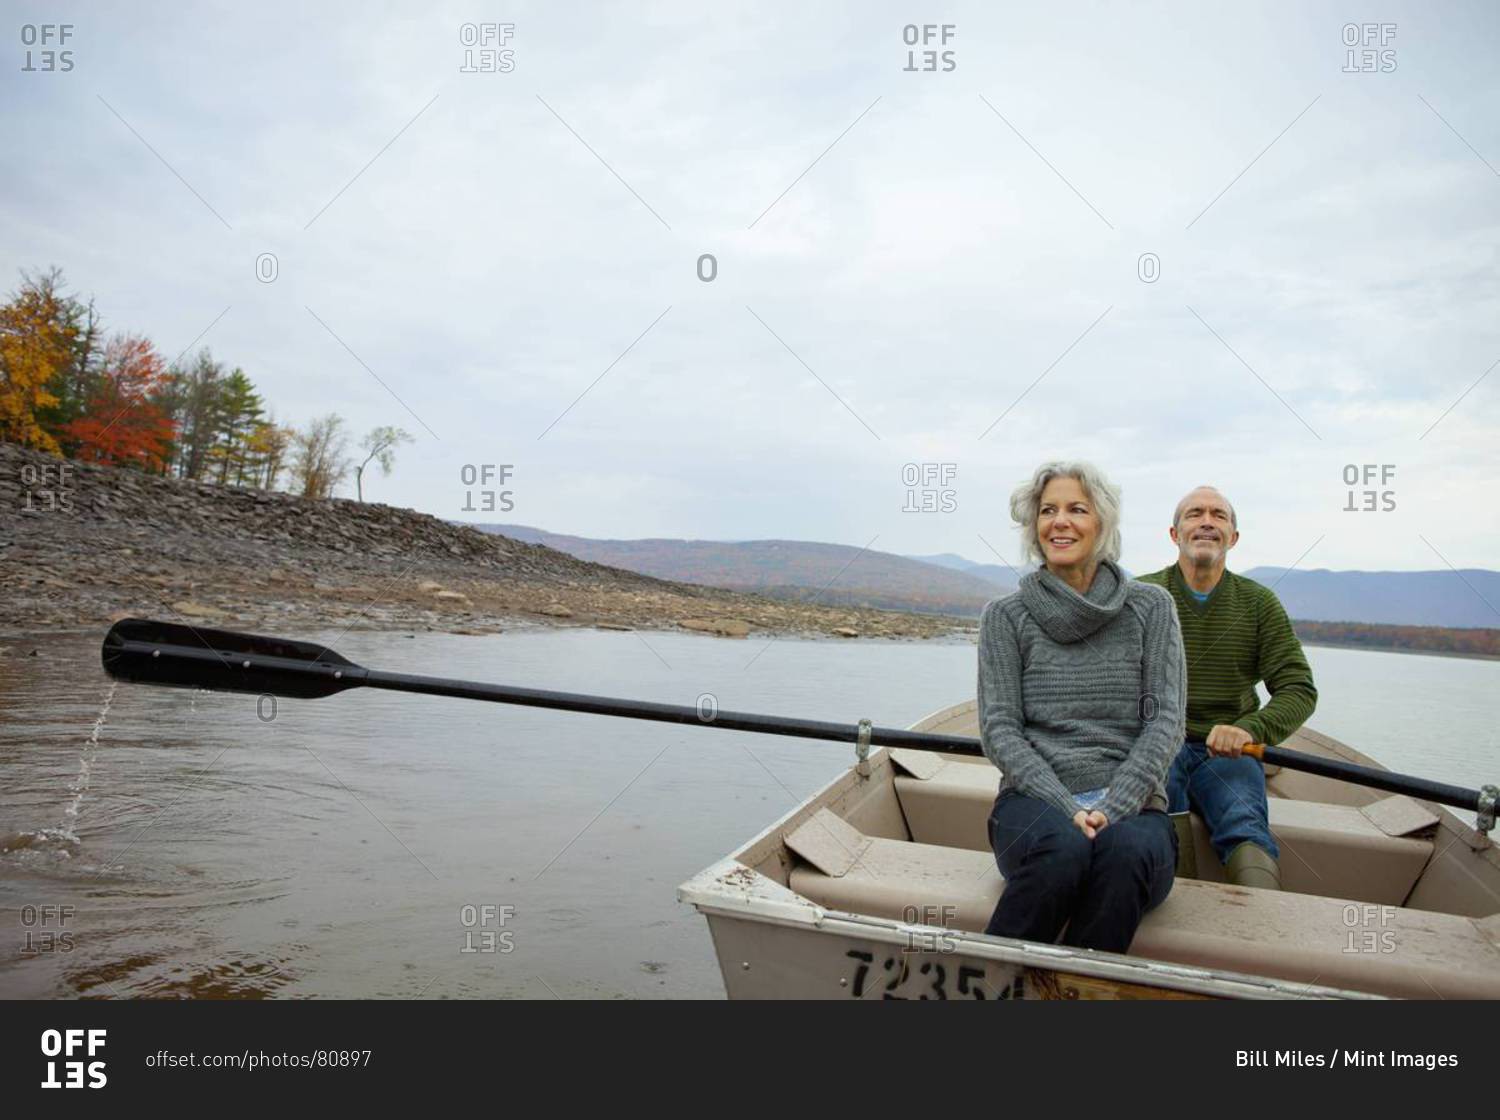 A couple, man and woman sitting in a rowing boat on the water on an autumn day